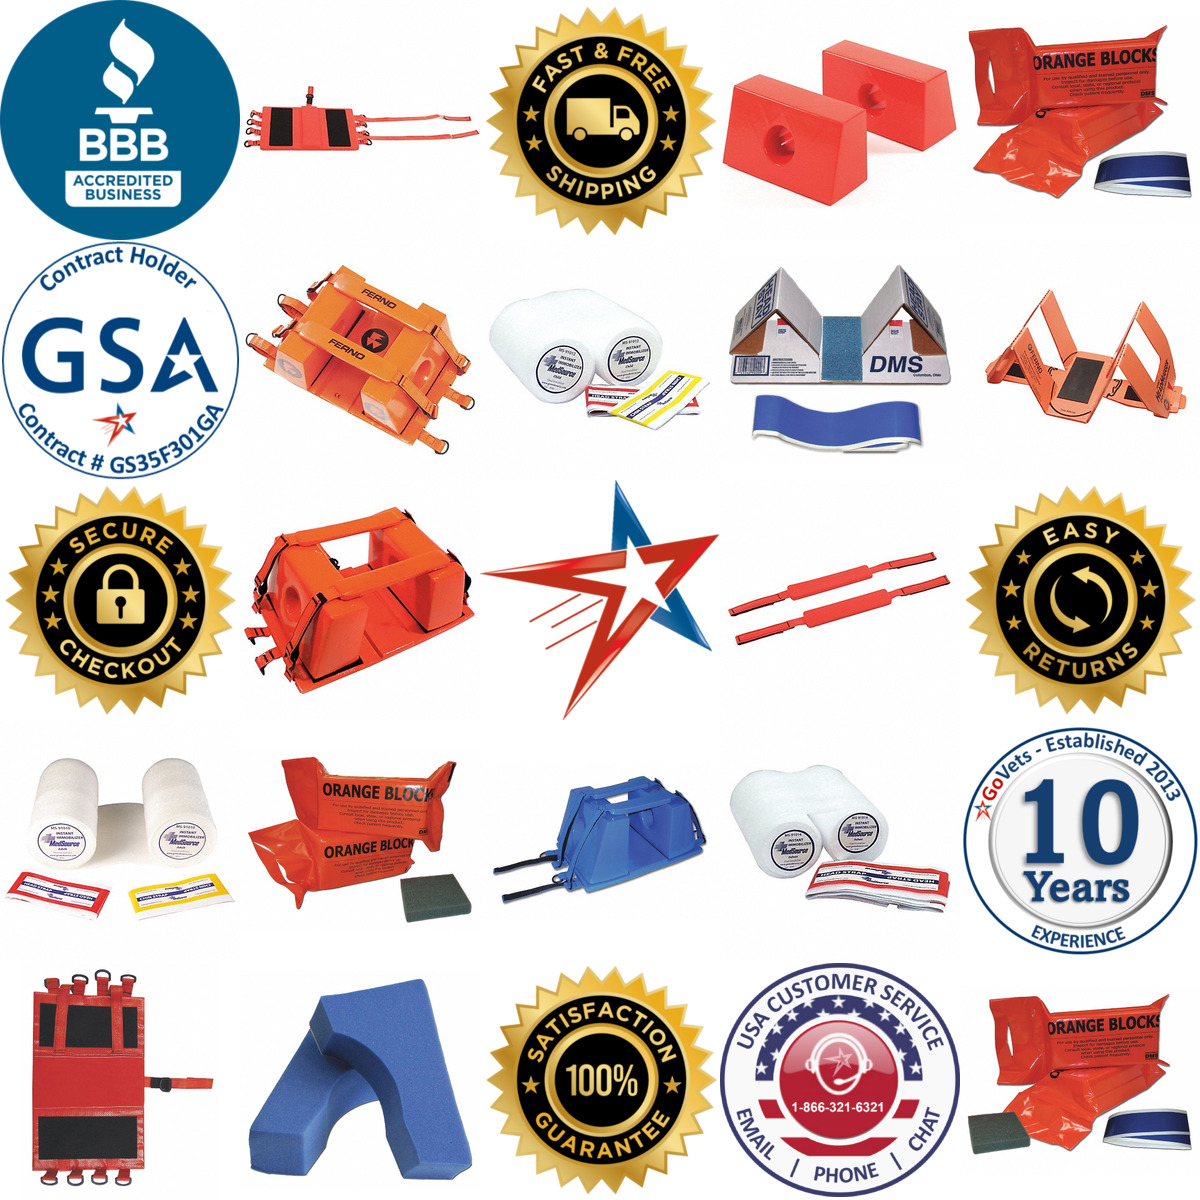 A selection of Head Immobilizers products on GoVets